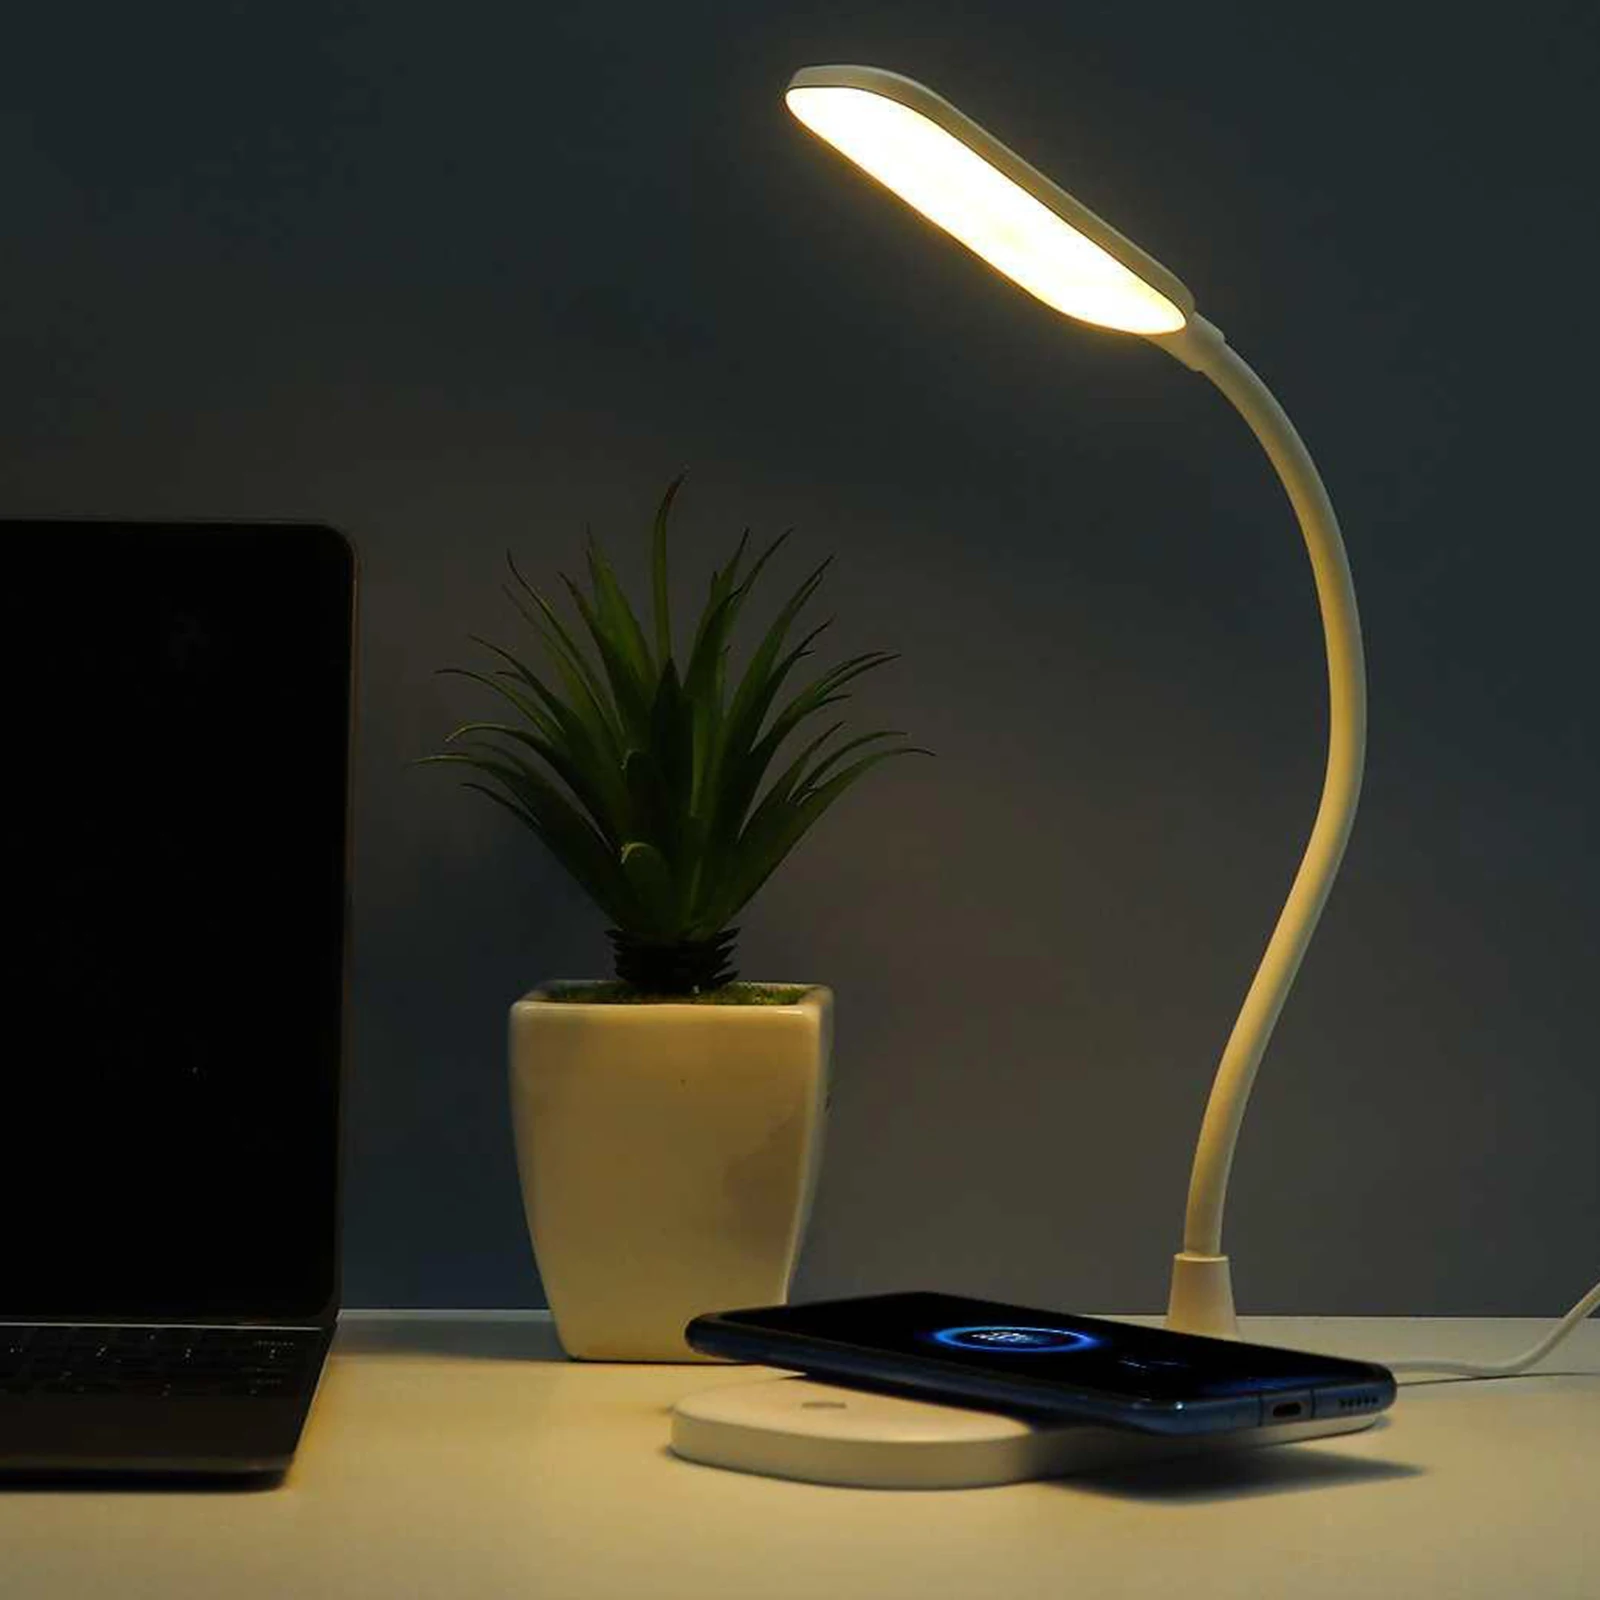 Dimmable LED Desk Lamp Room Reading Light Lamp 10W Wireless Charger